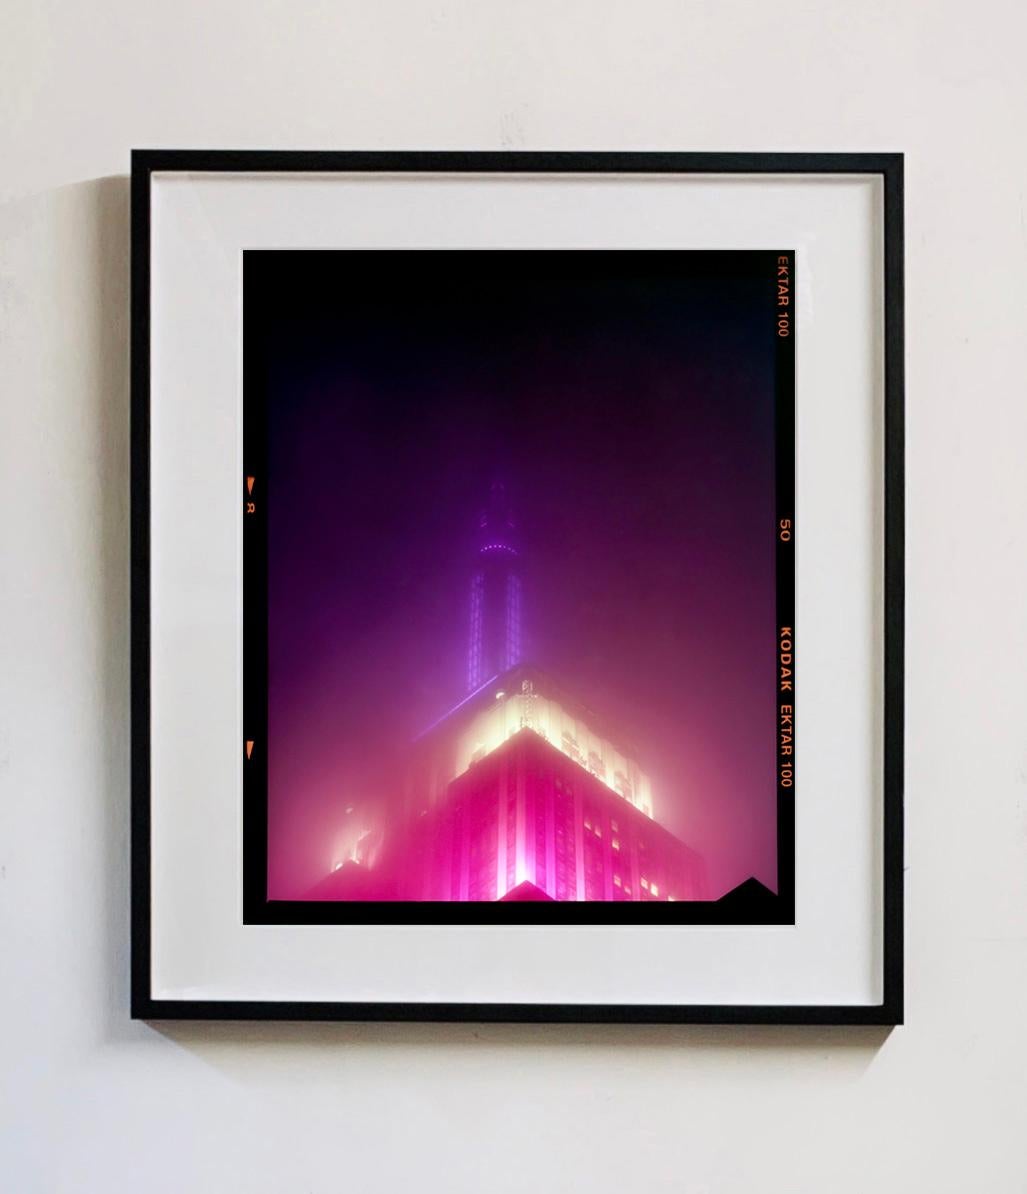 NOMAD I (Film Rebate), New York - Conceptual Architectural Color Photography - Print by Richard Heeps